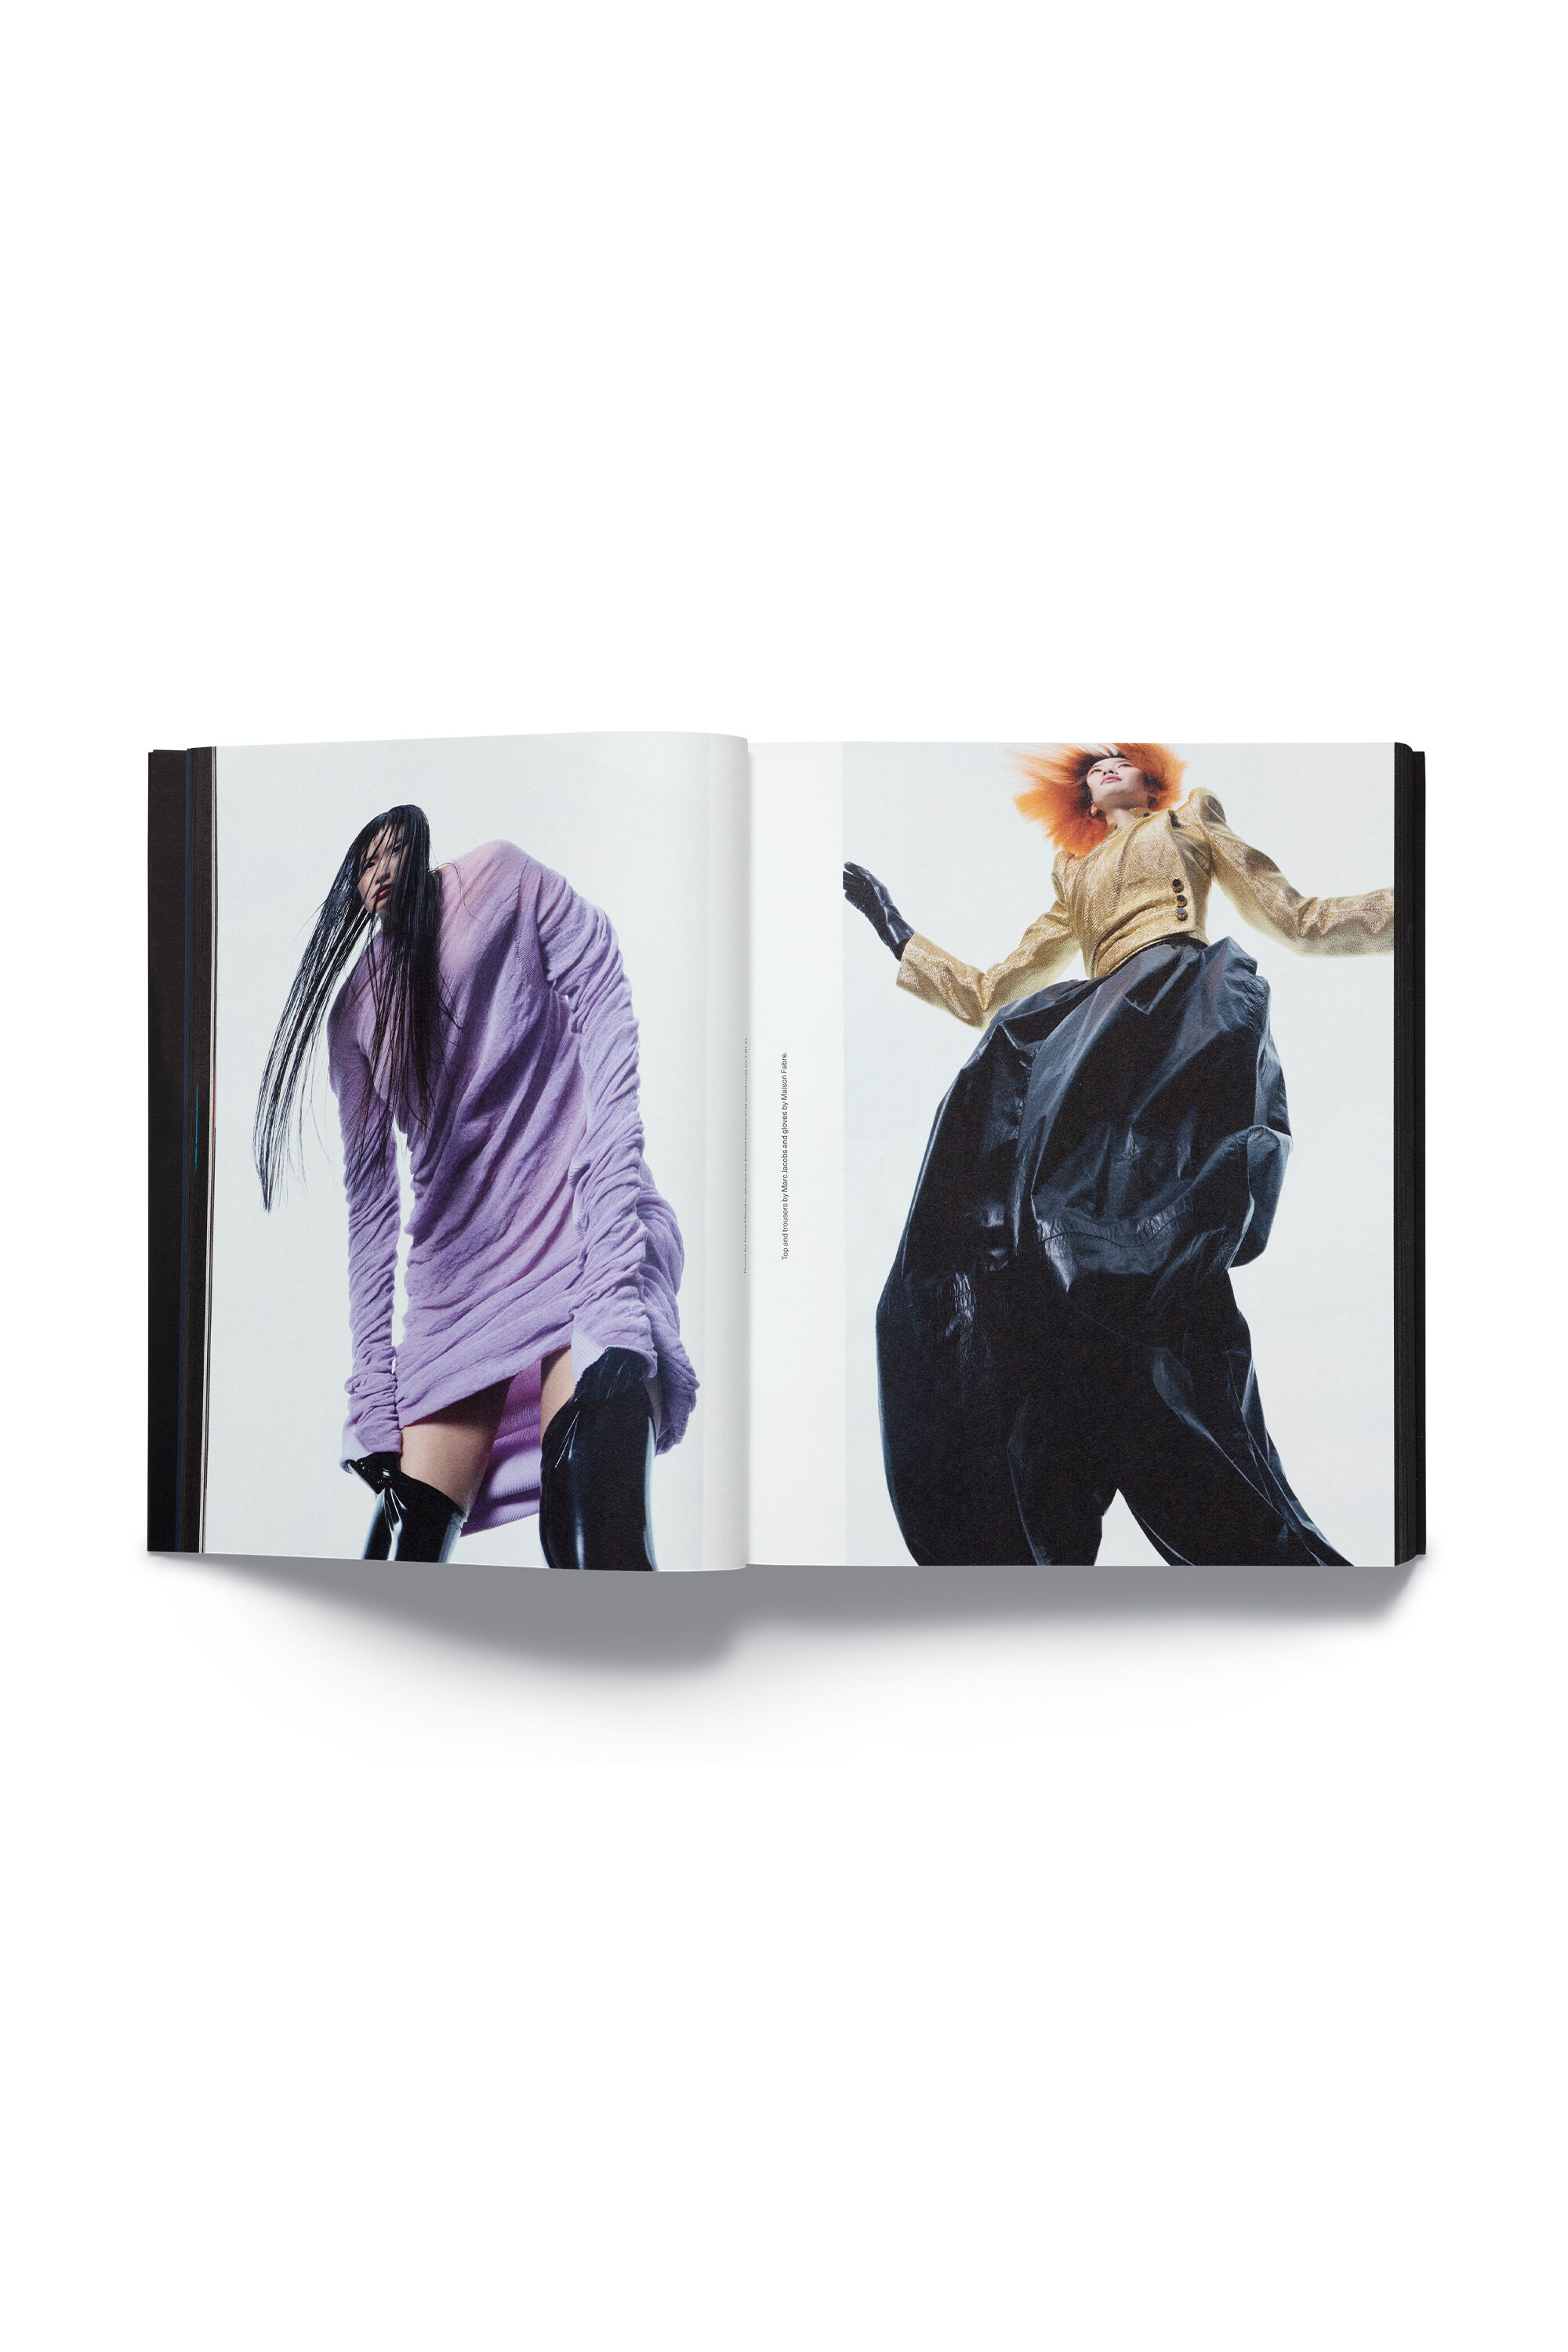 ACNE PAPER ISSUE 19